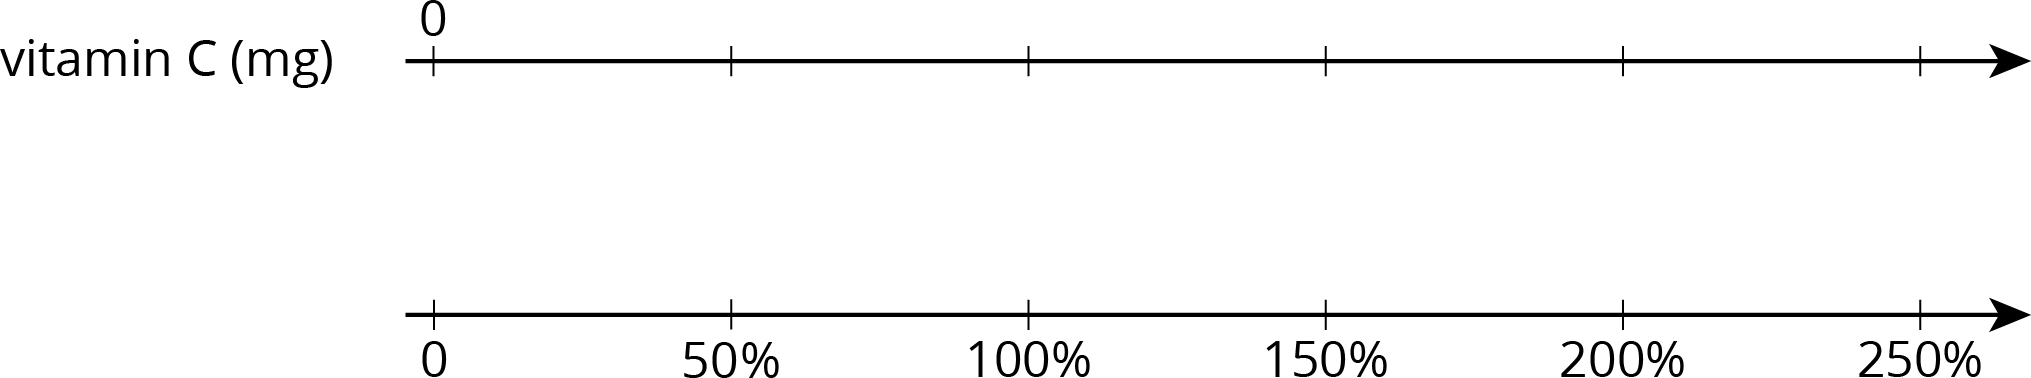 A double number line with 6 evenly spaced tick marks. The top number line is labeled “vitamin C, in milligrams” and the first tick mark is labeled 0. The other tick marks are unlabeled. The bottom number line is not labeled and starting with the first tick mark 0, 50 percent, 100 percent, 150 percent, 200 percent, and 250 percent are labeled.